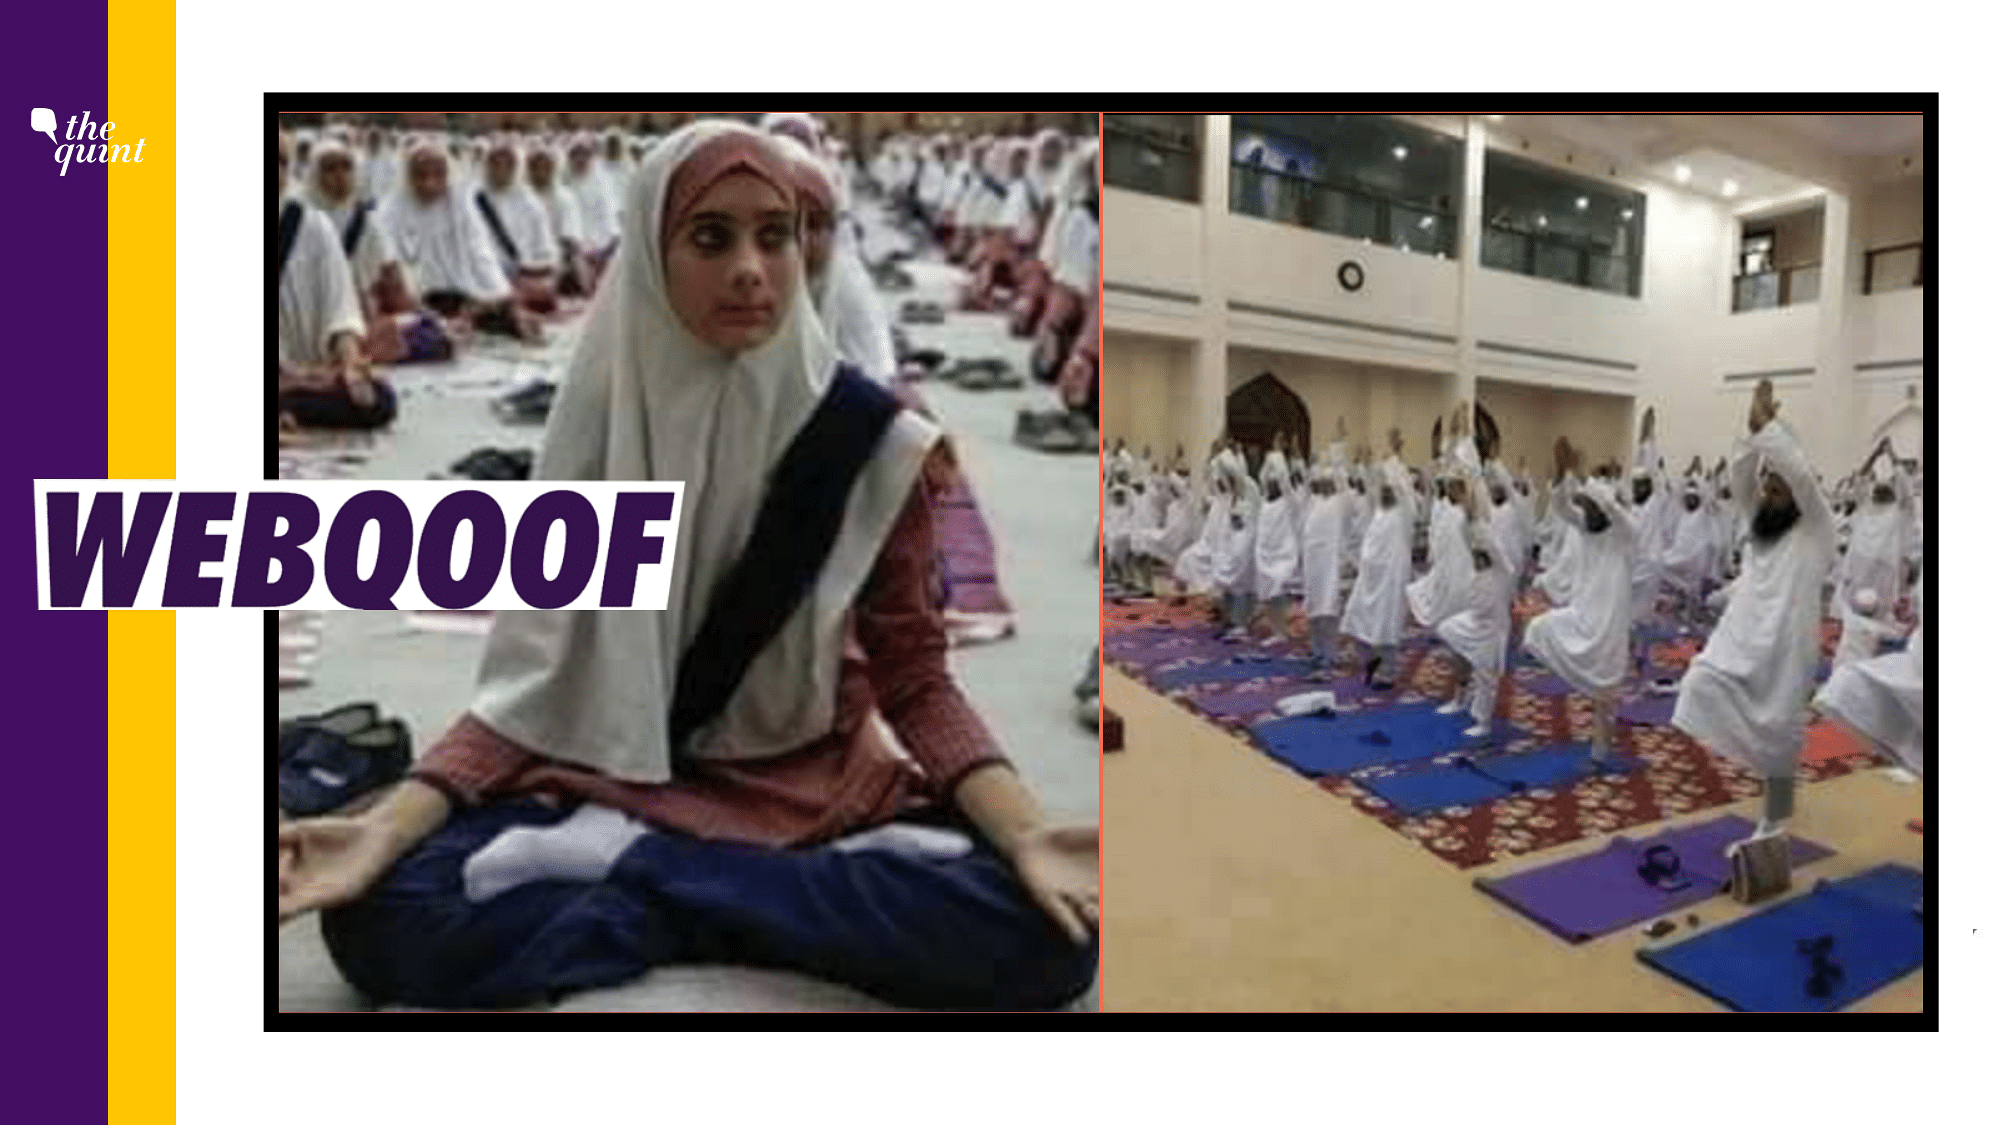 Social media users have claimed that the photographs show Muslims practising yoga in Saudi Arabia.